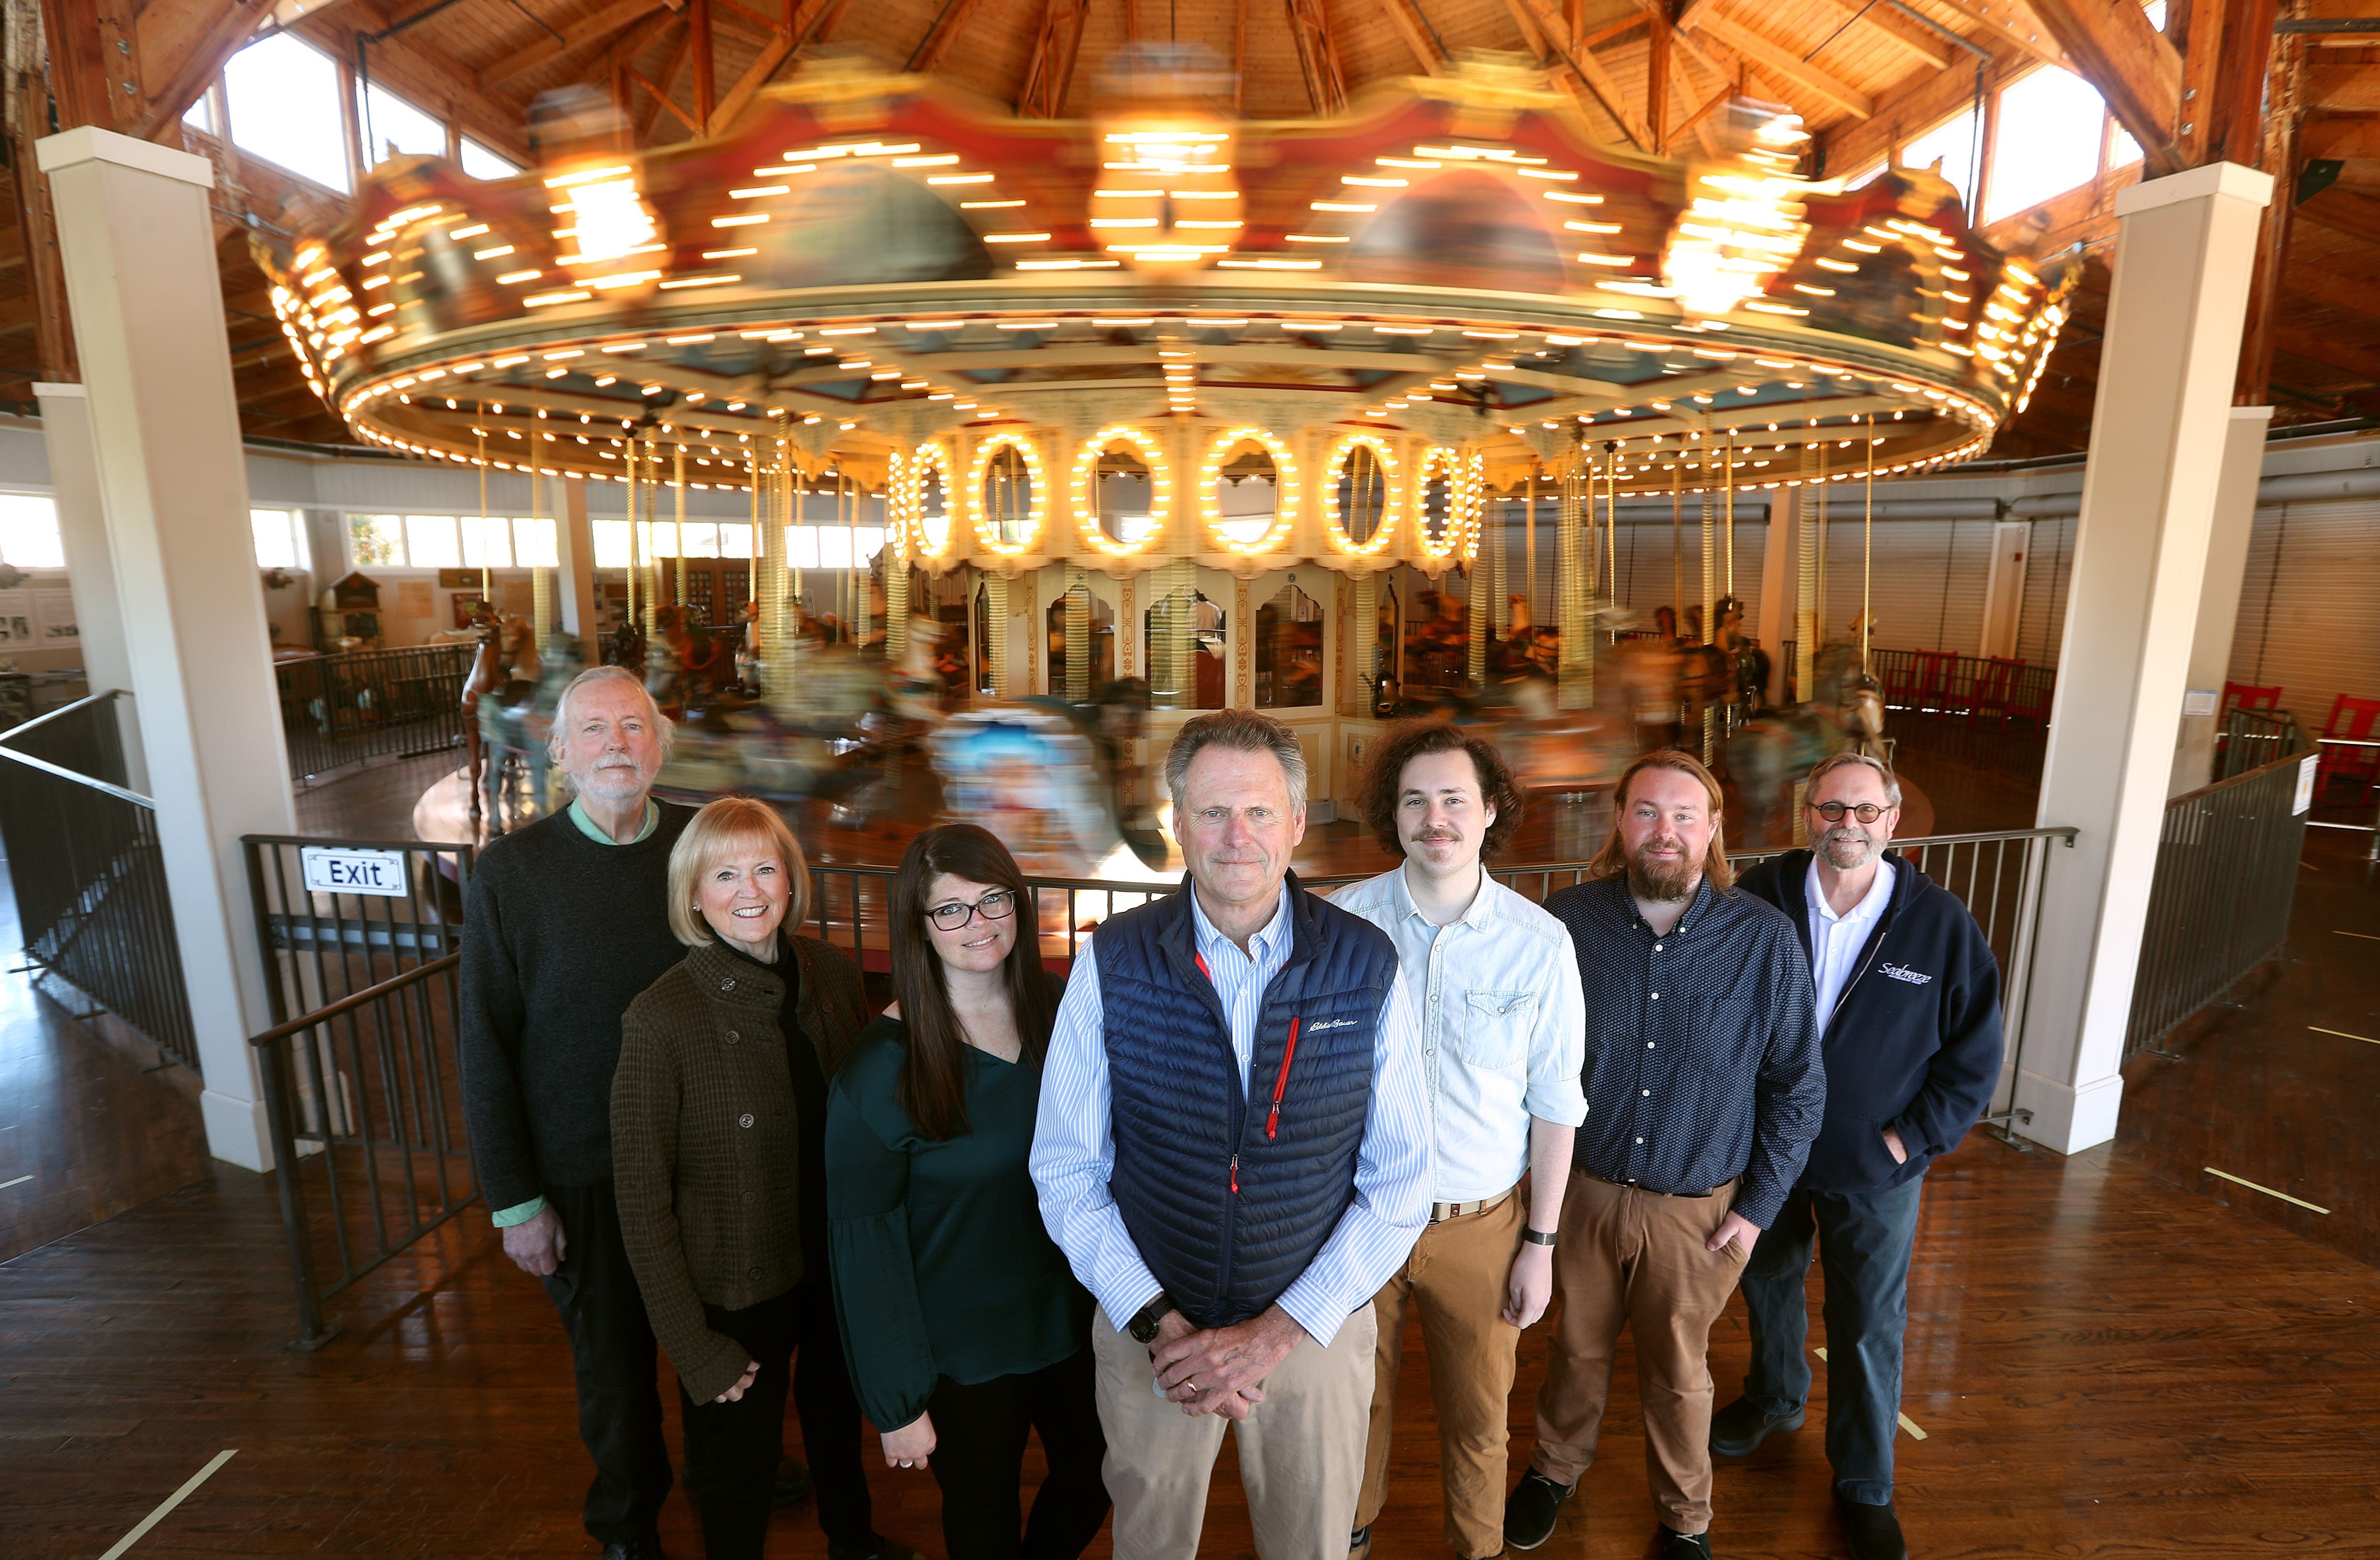 The Norris (Long) family has operated Seabreeze Amusement Park since 1937. From left are, George Norris, Anne Norris, Genevieve Norris-Brown, Rob Norris, Jack Norris, Alex Norris and John Norris, pictured at the iconic carousel. The families' grandfather George Long Jr. began operating the park in 1937 and bought the park in 1946, changing the name to Dreamland Park.